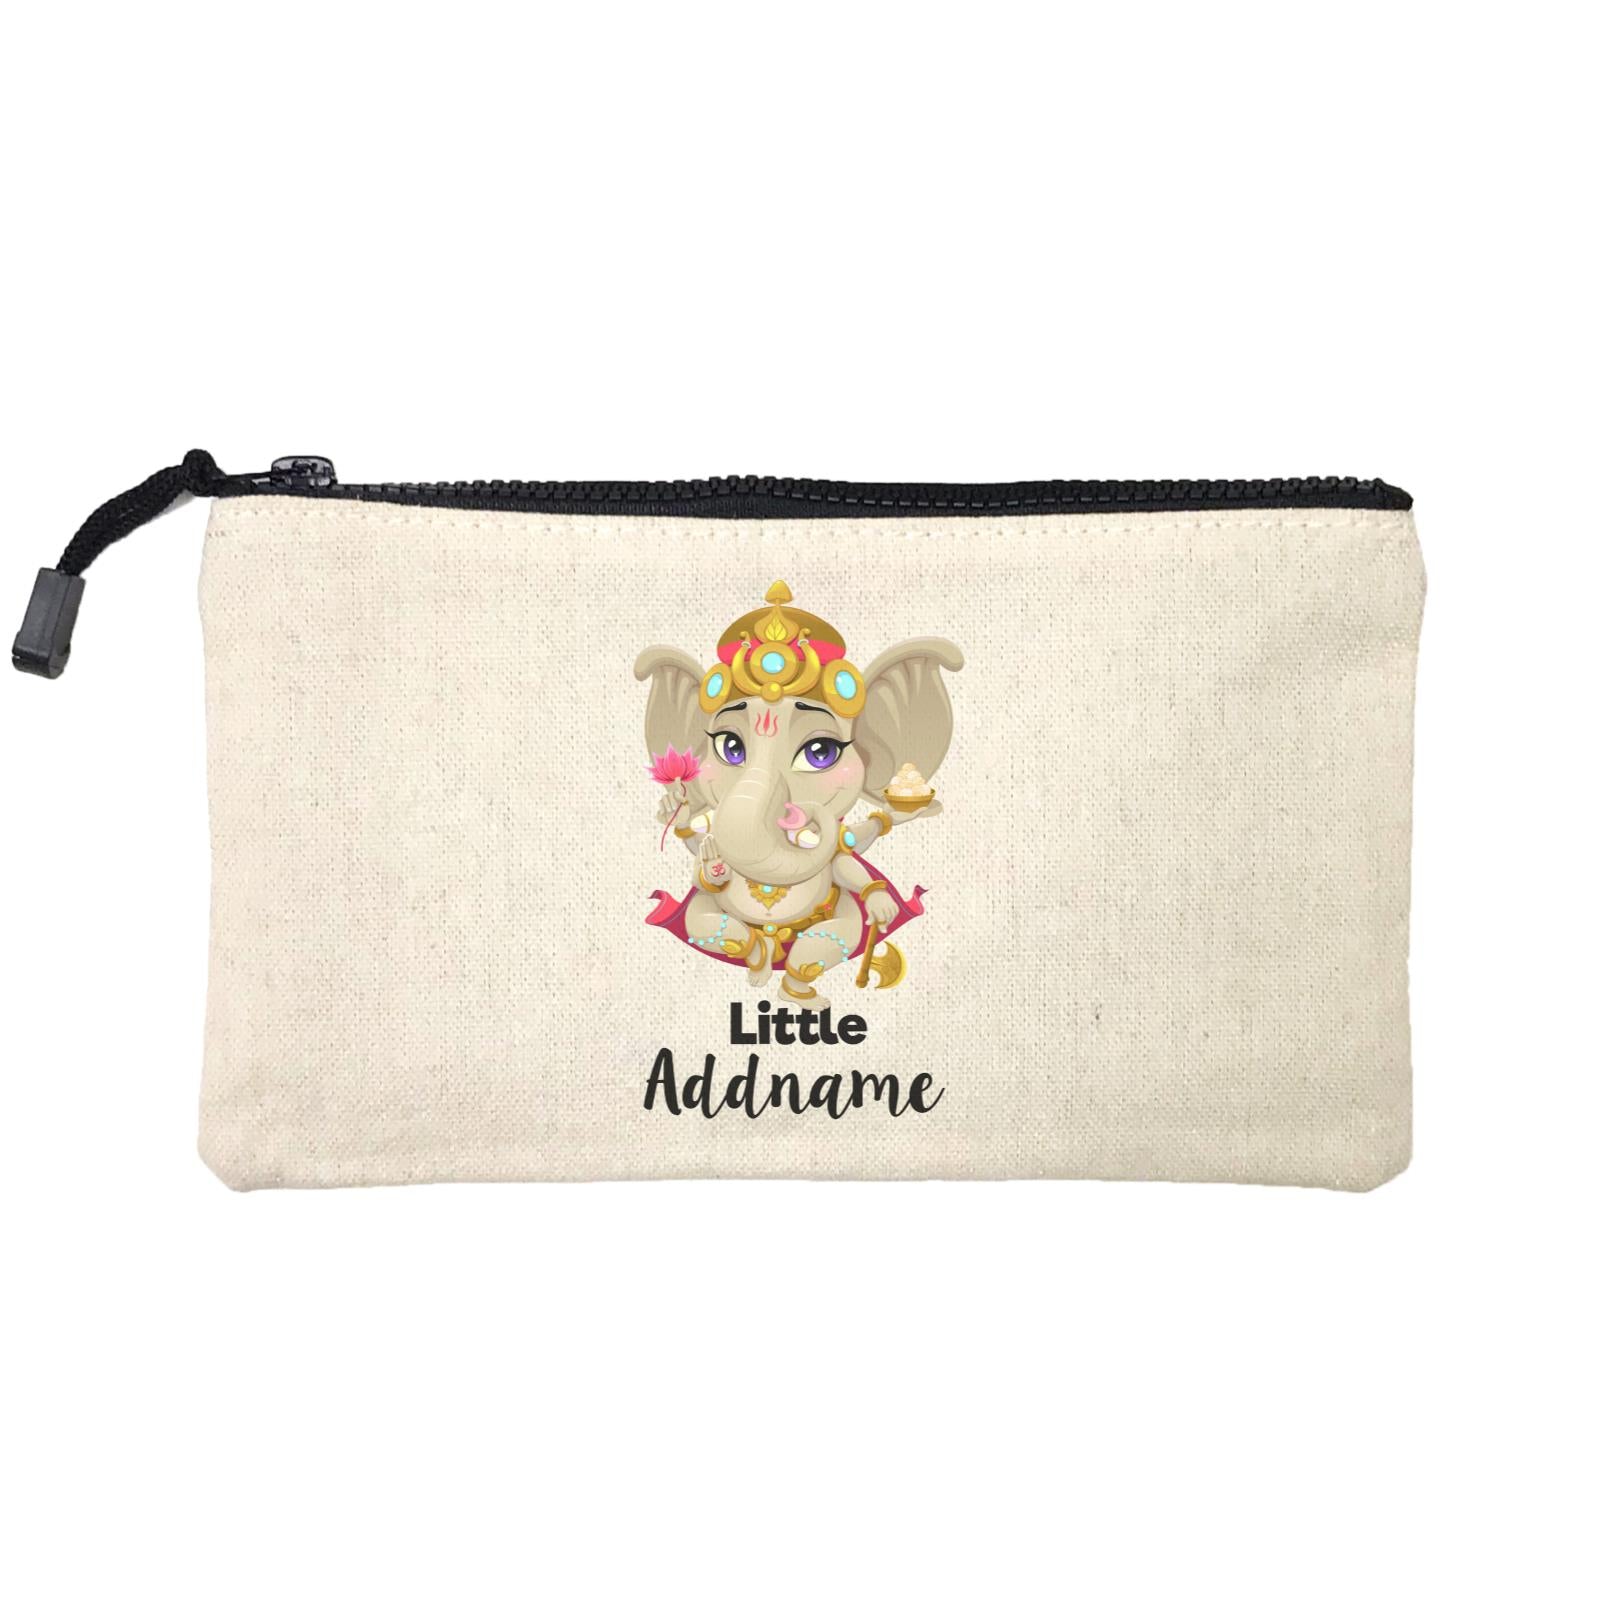 Artistic Ganesha Little Addname Mini Accessories Stationery Pouch